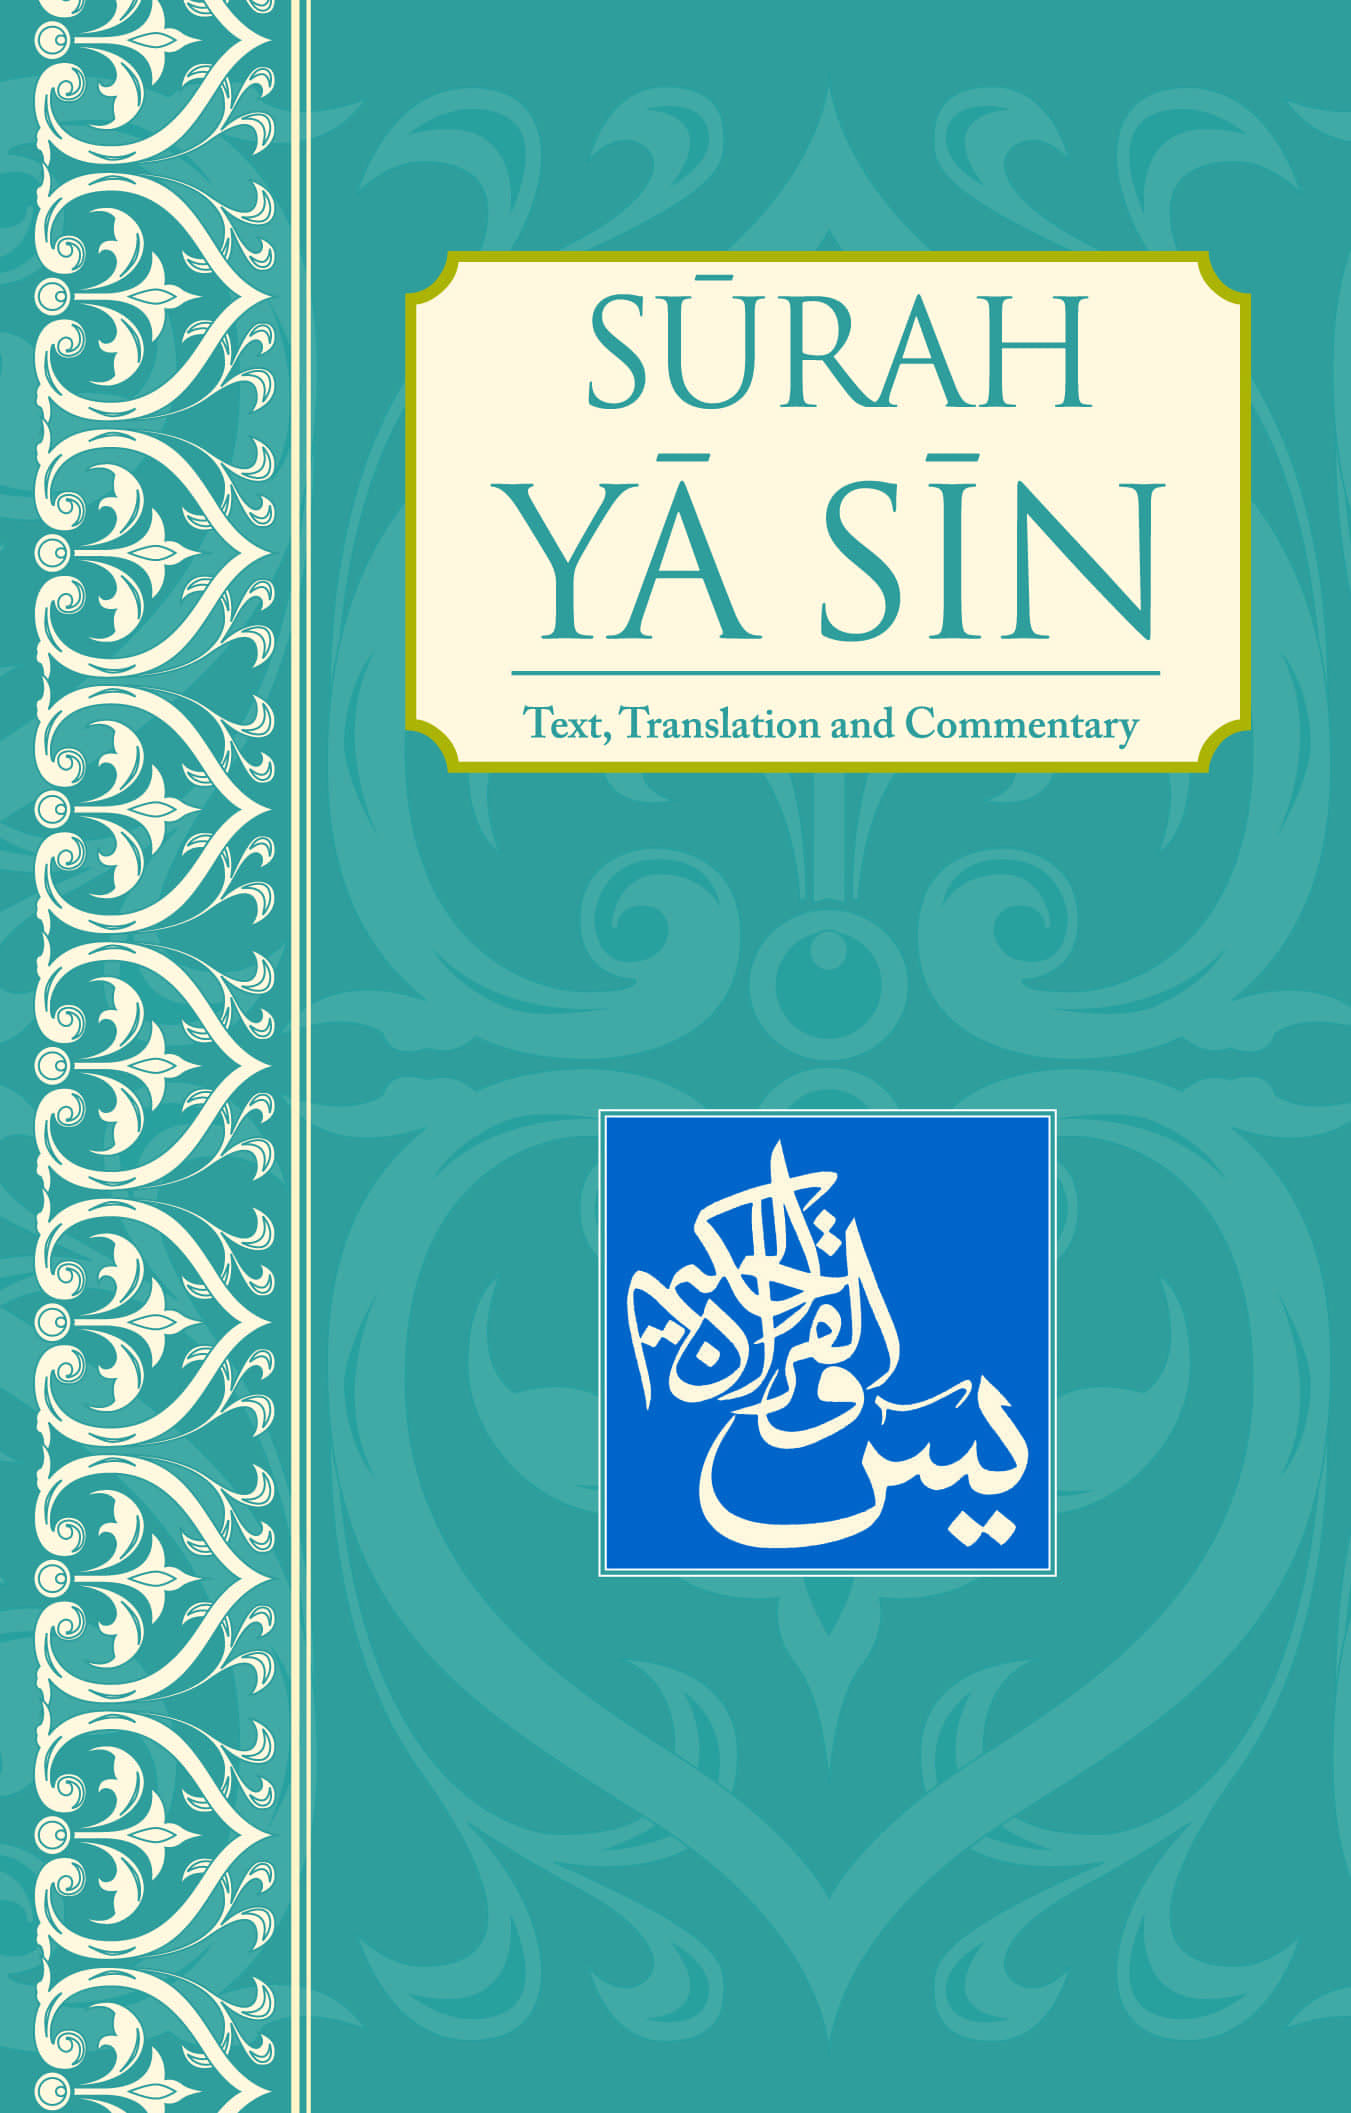 Surah Ya Sin: Text, translation and commentary